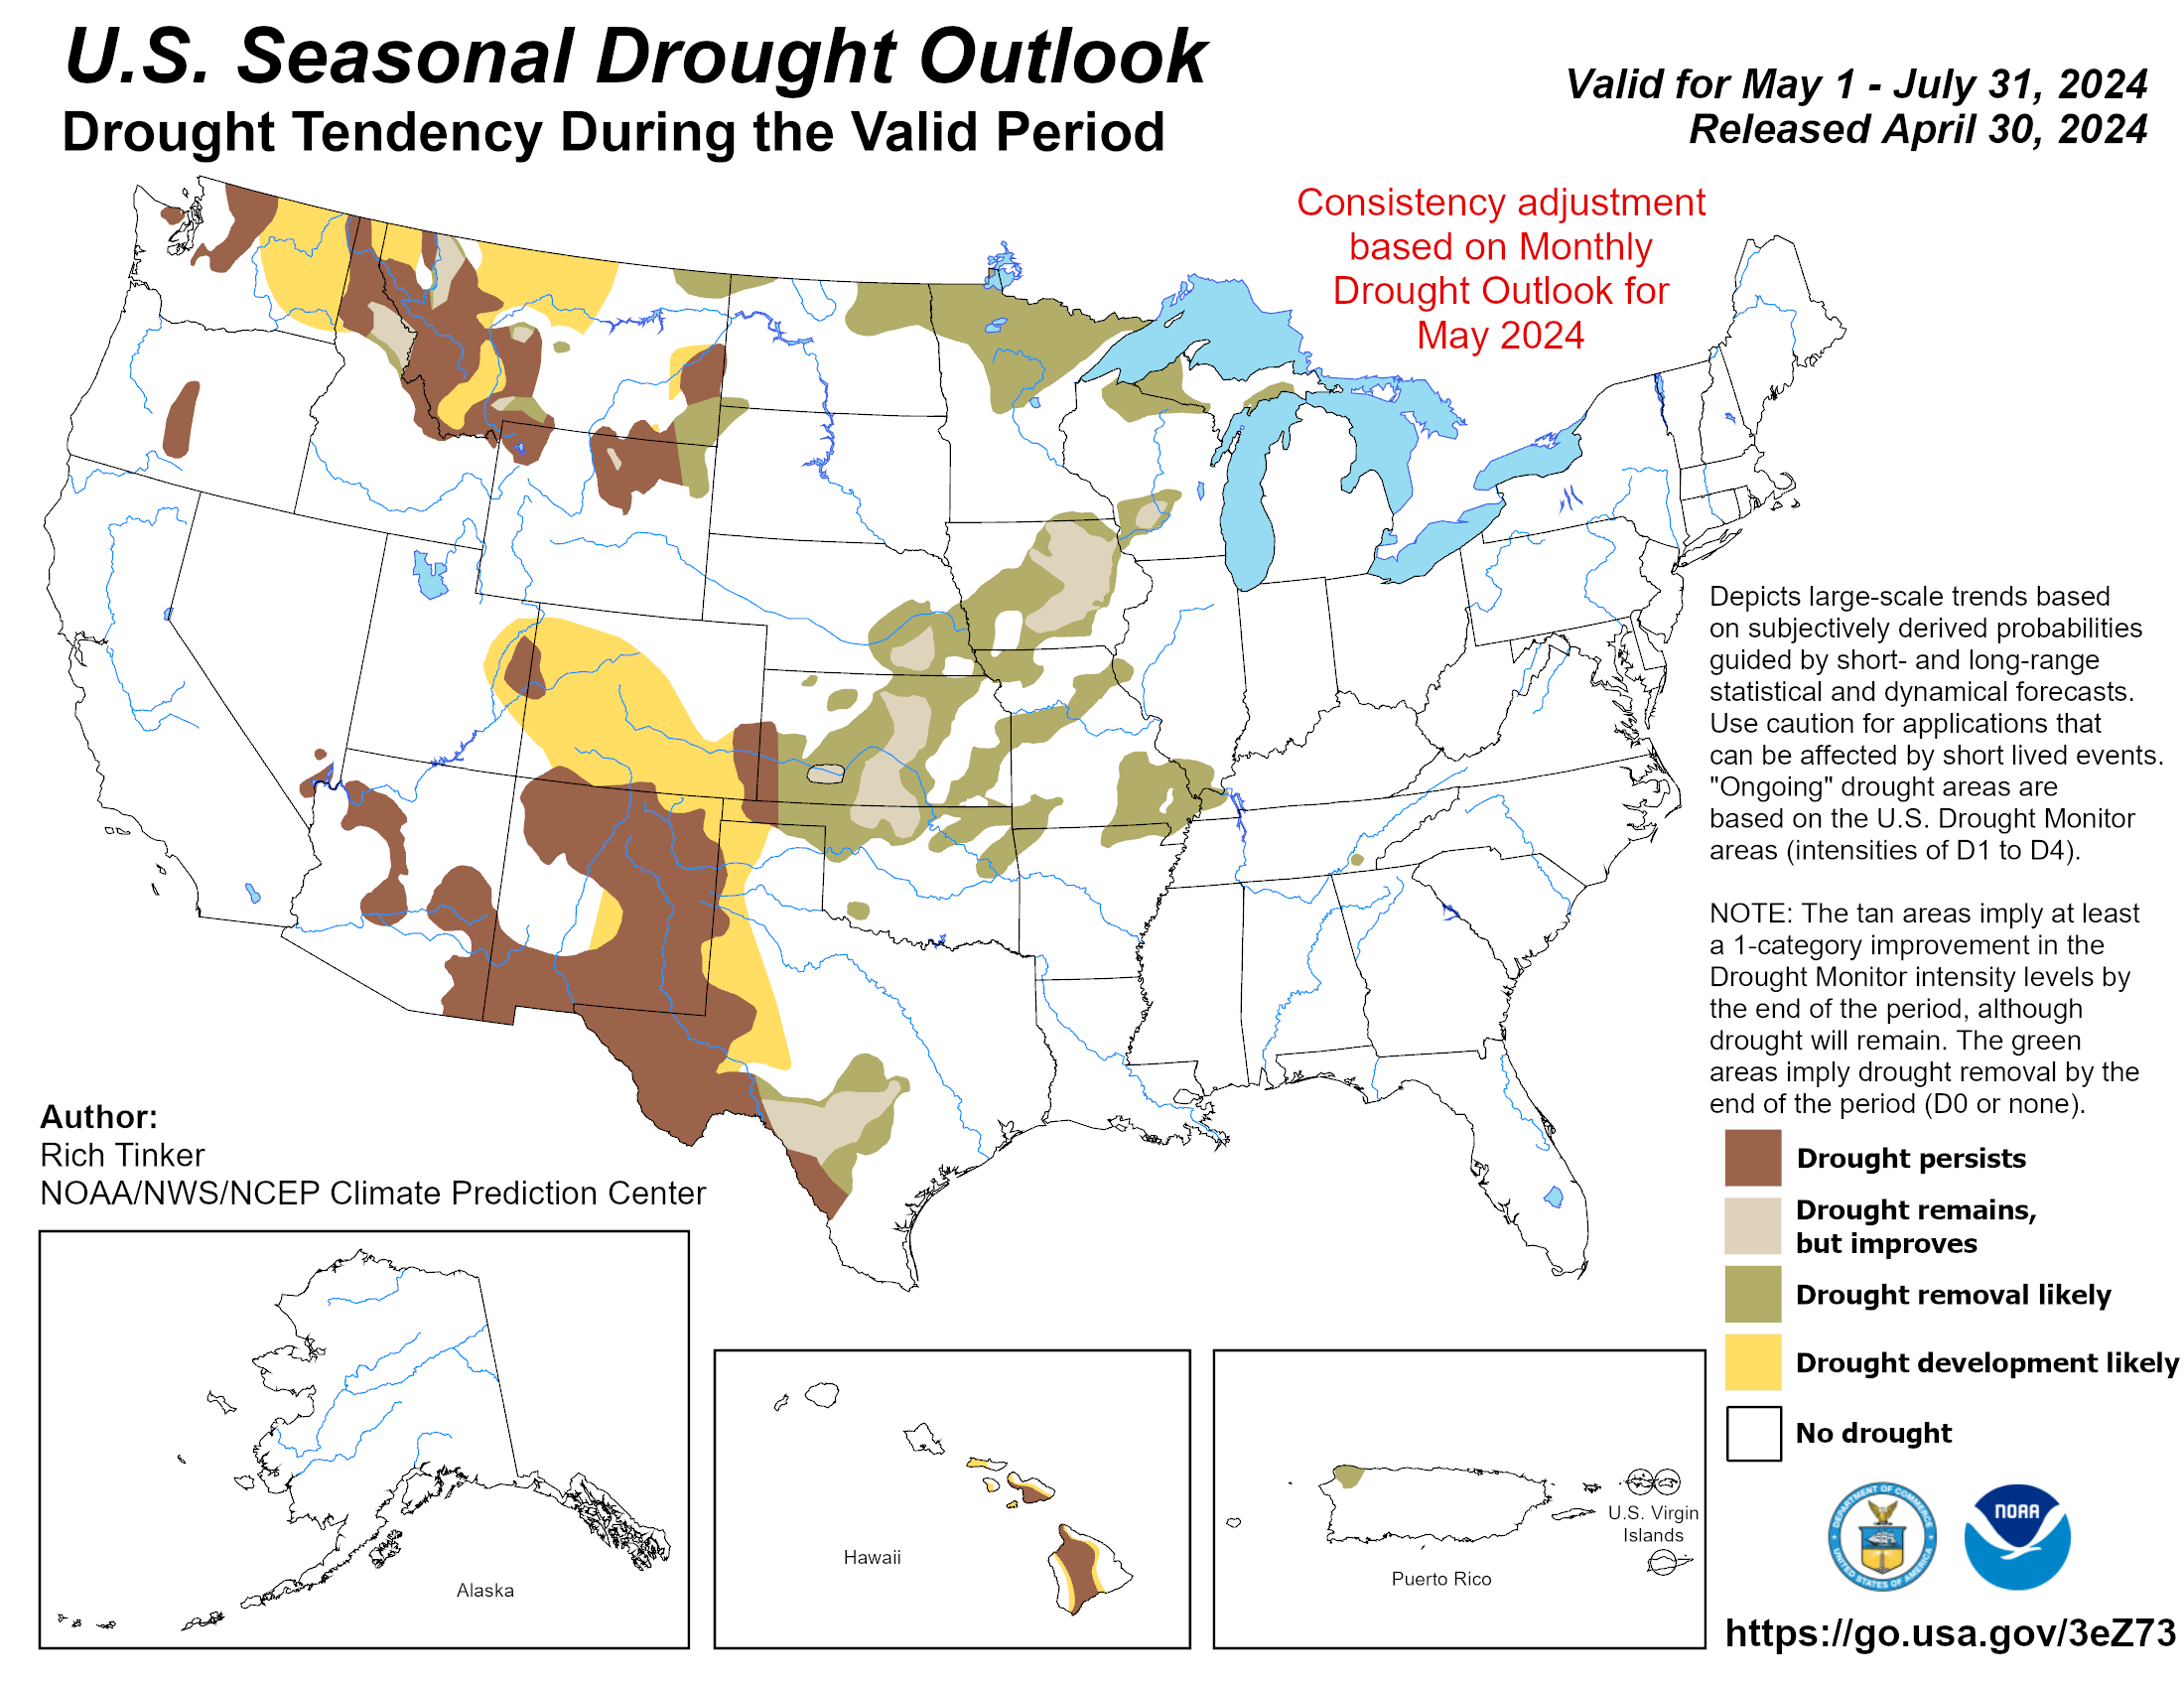 http://www.cpc.ncep.noaa.gov/products/expert_assessment/season_drought.png